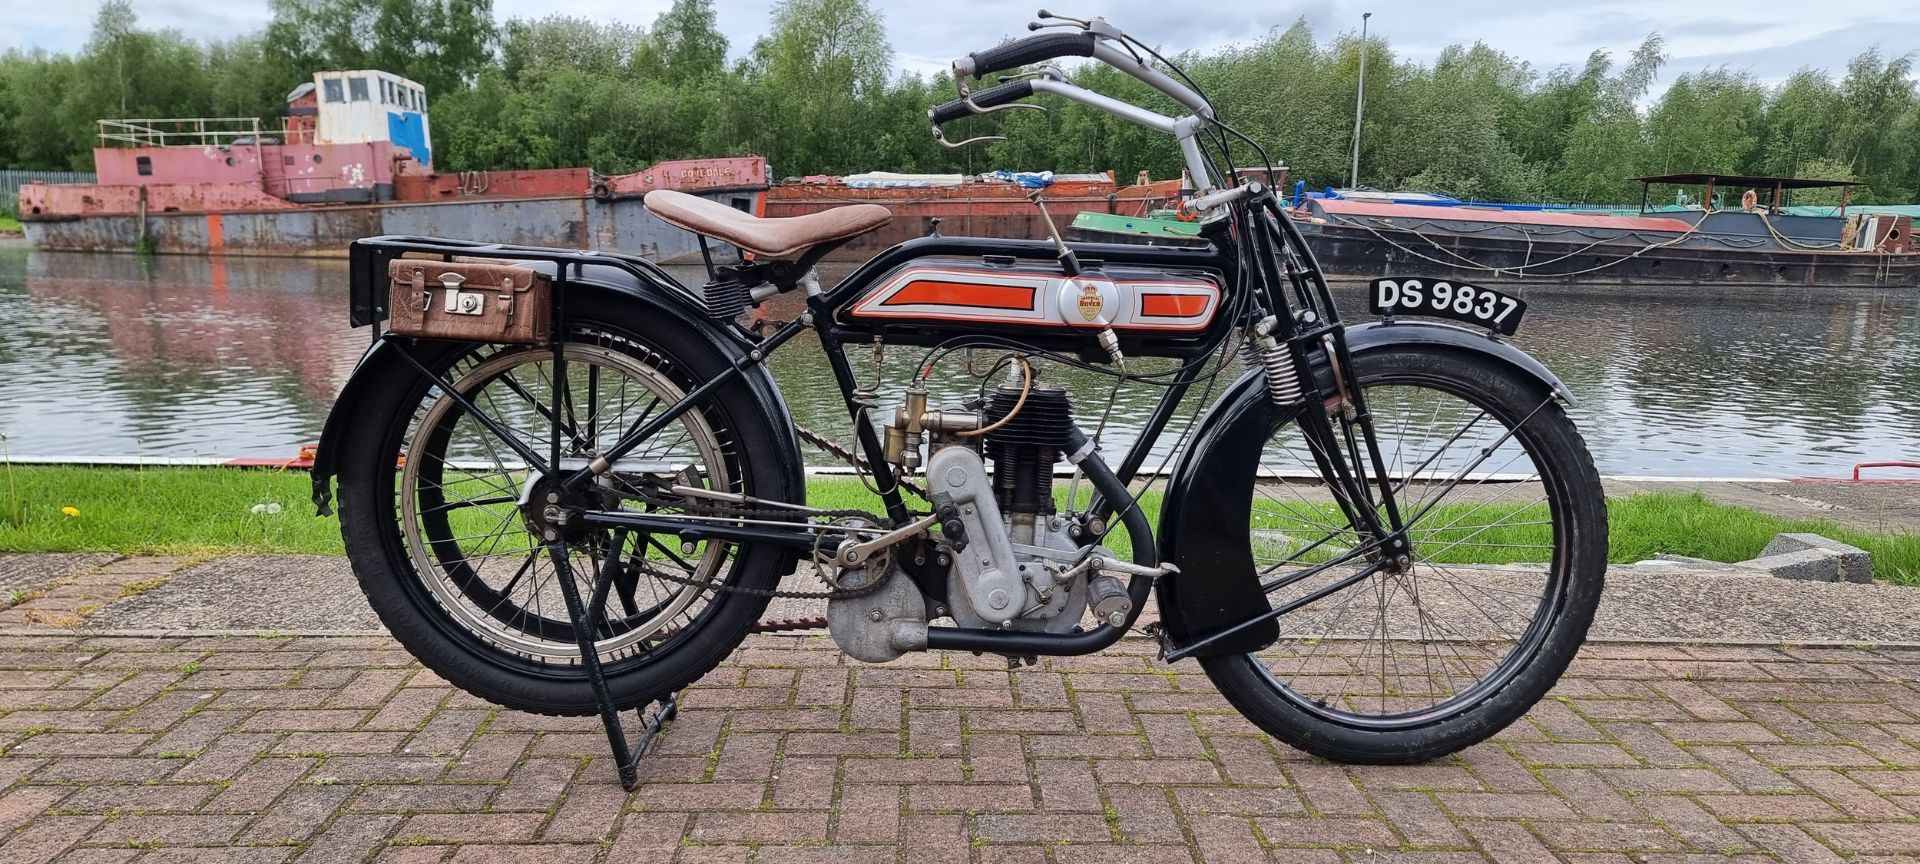 1913 Rover 3.5hp, 499 cc. Registration number DS 9837 (non-transferable). Frame number S37508.